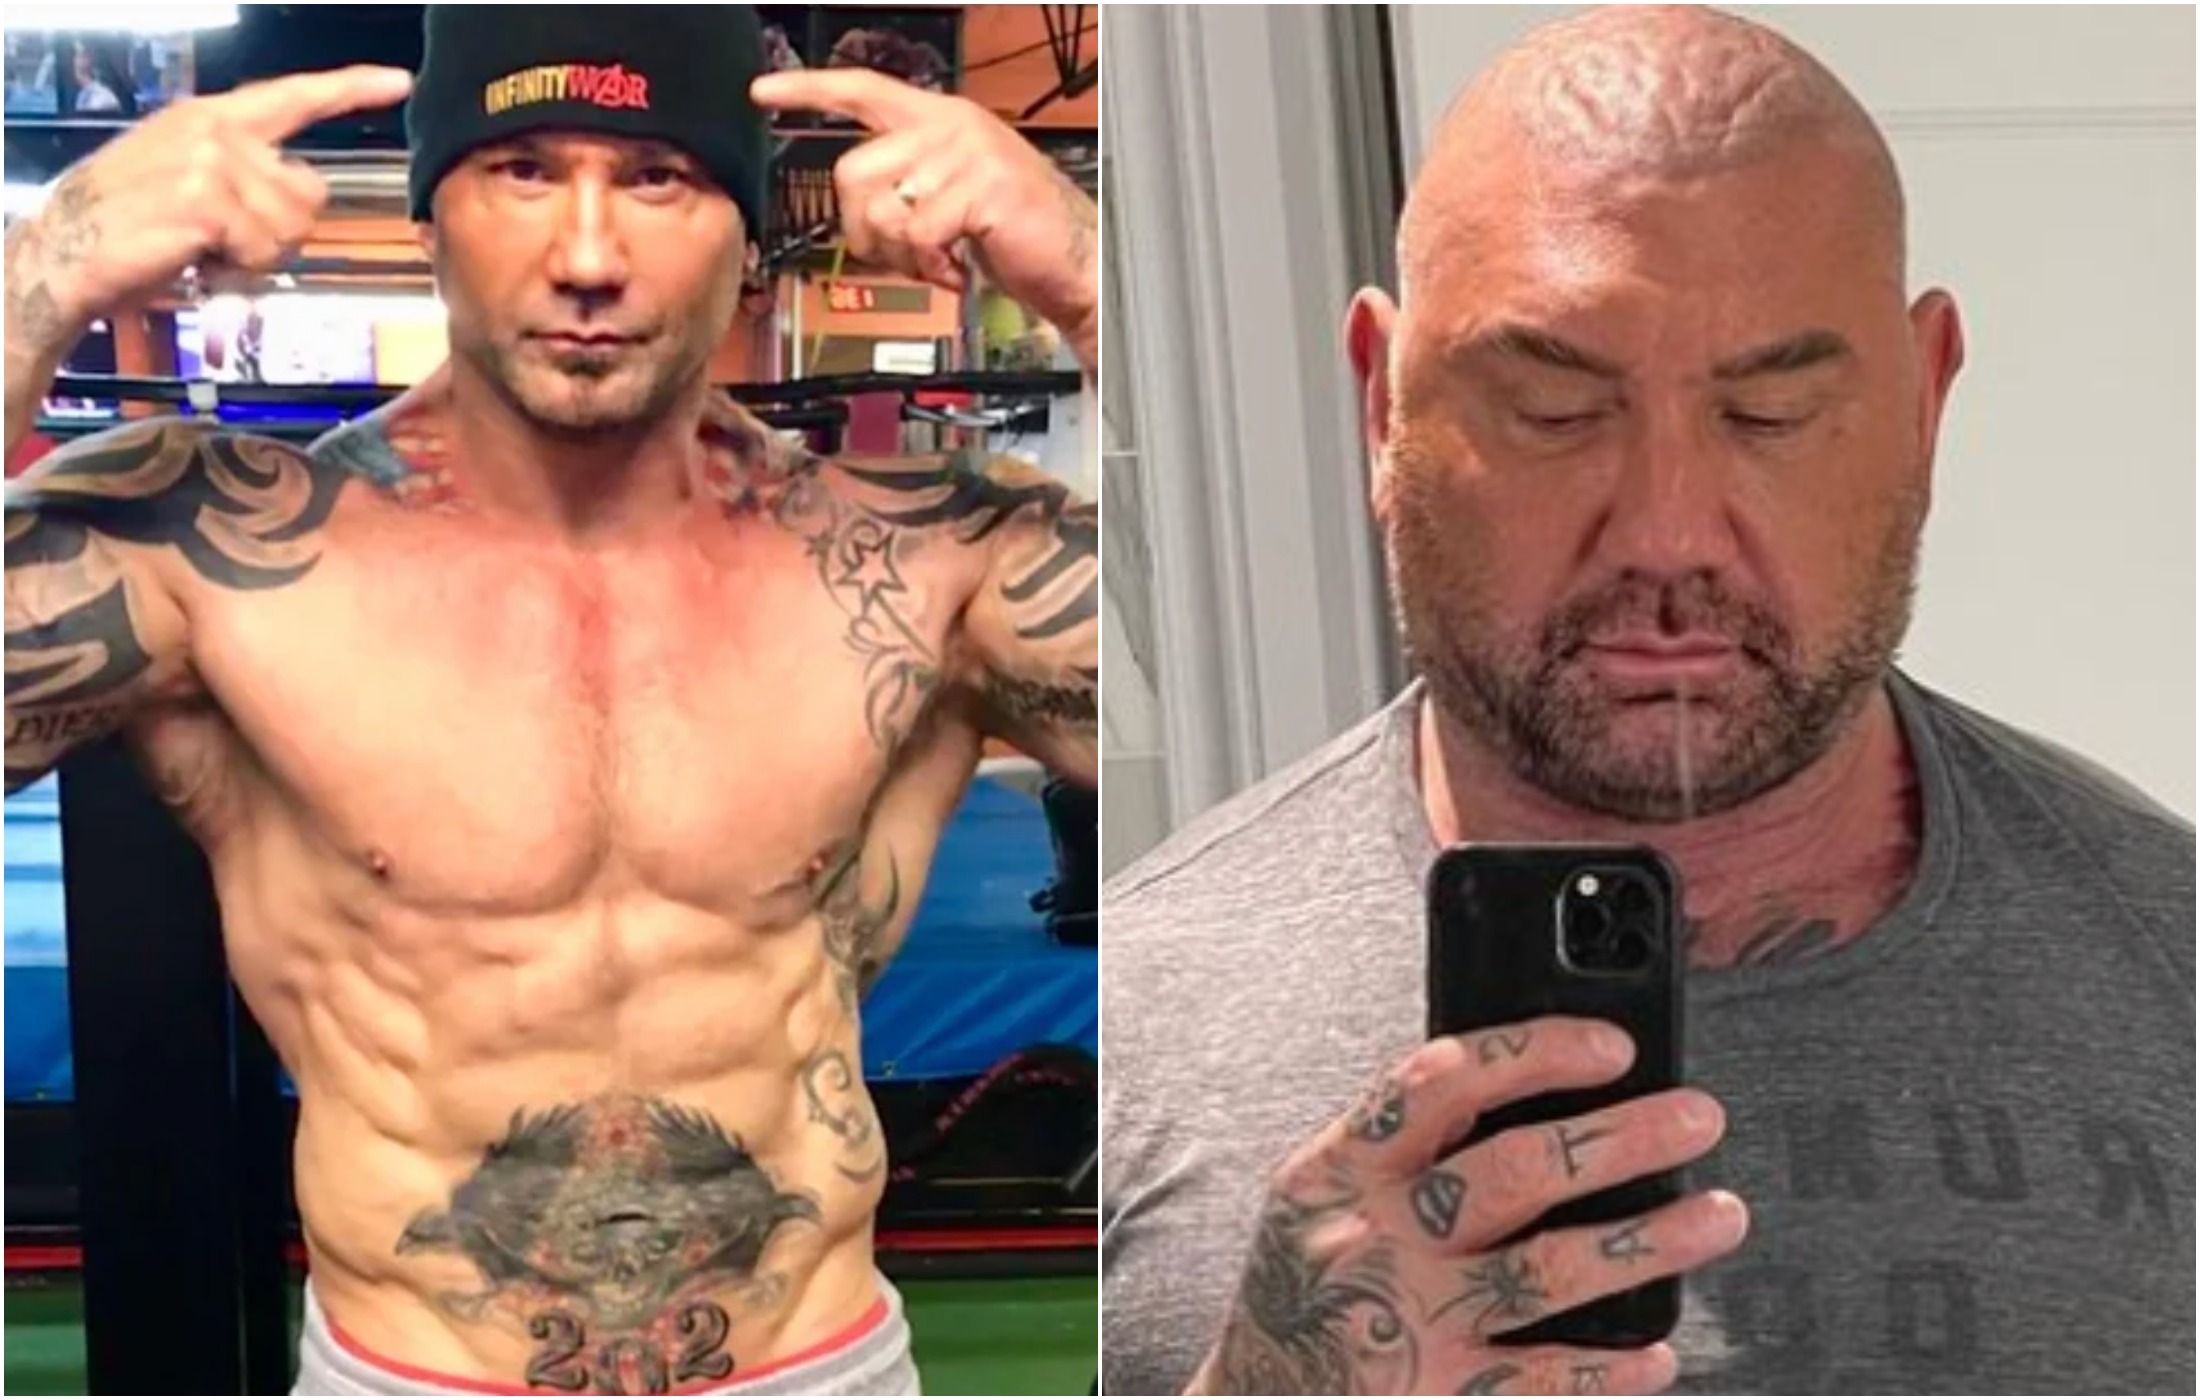 Batista ExWWE star undergoes serious body transformation for new